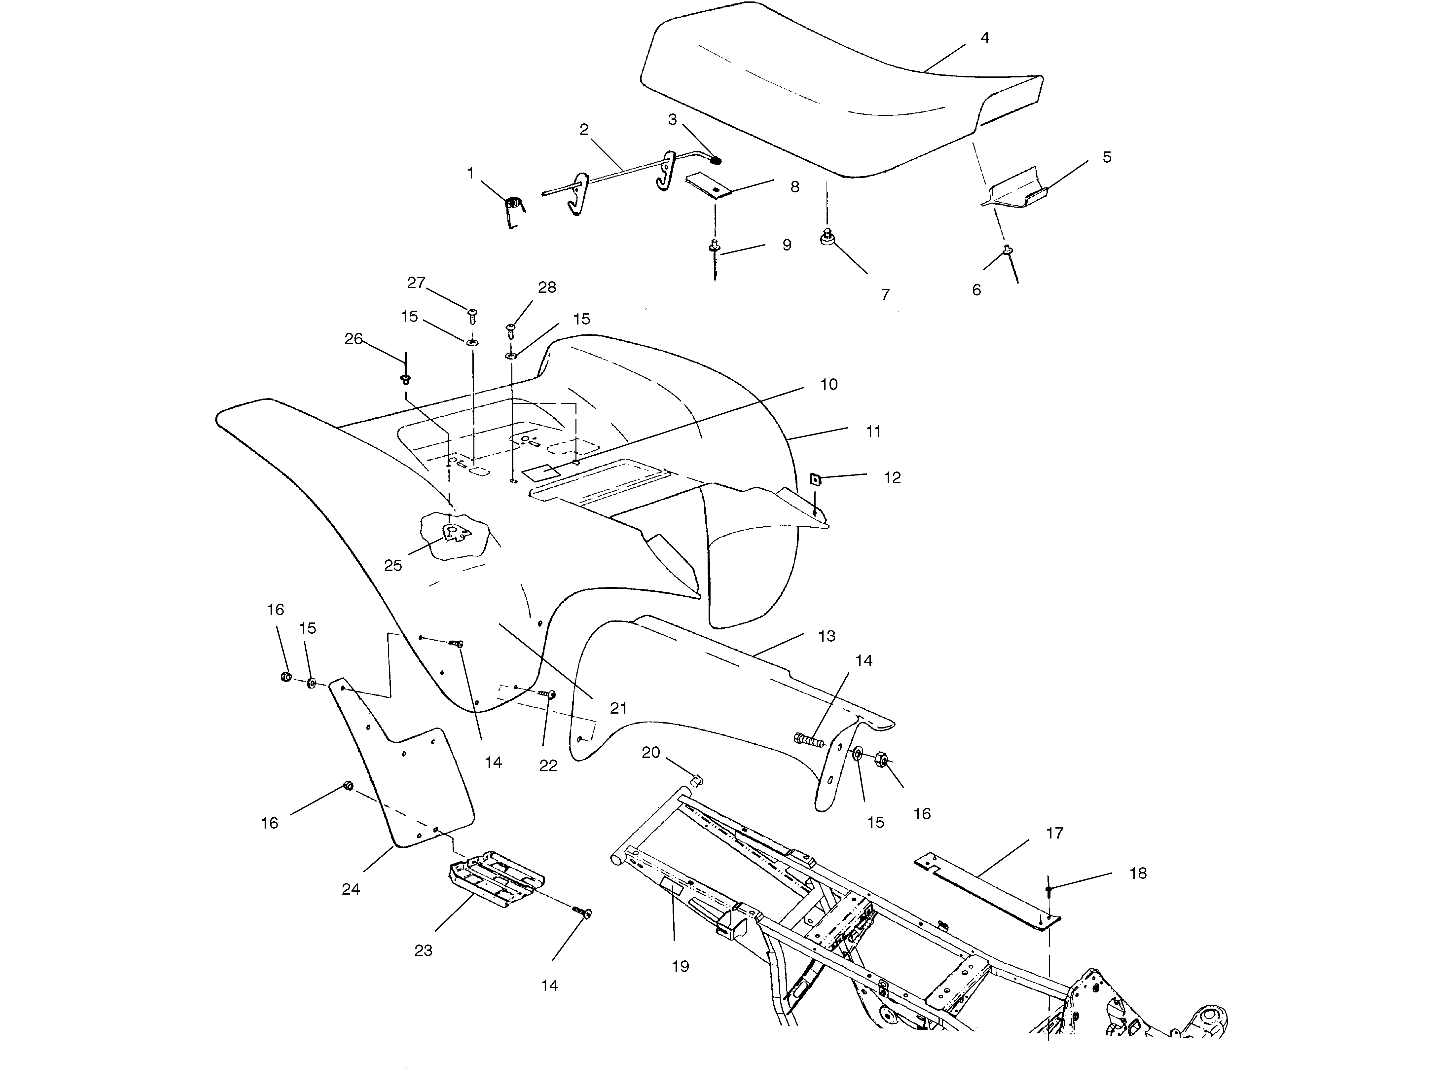 Part Number : 2683097 ASM-SEAT CUT/SEW FREEDOM